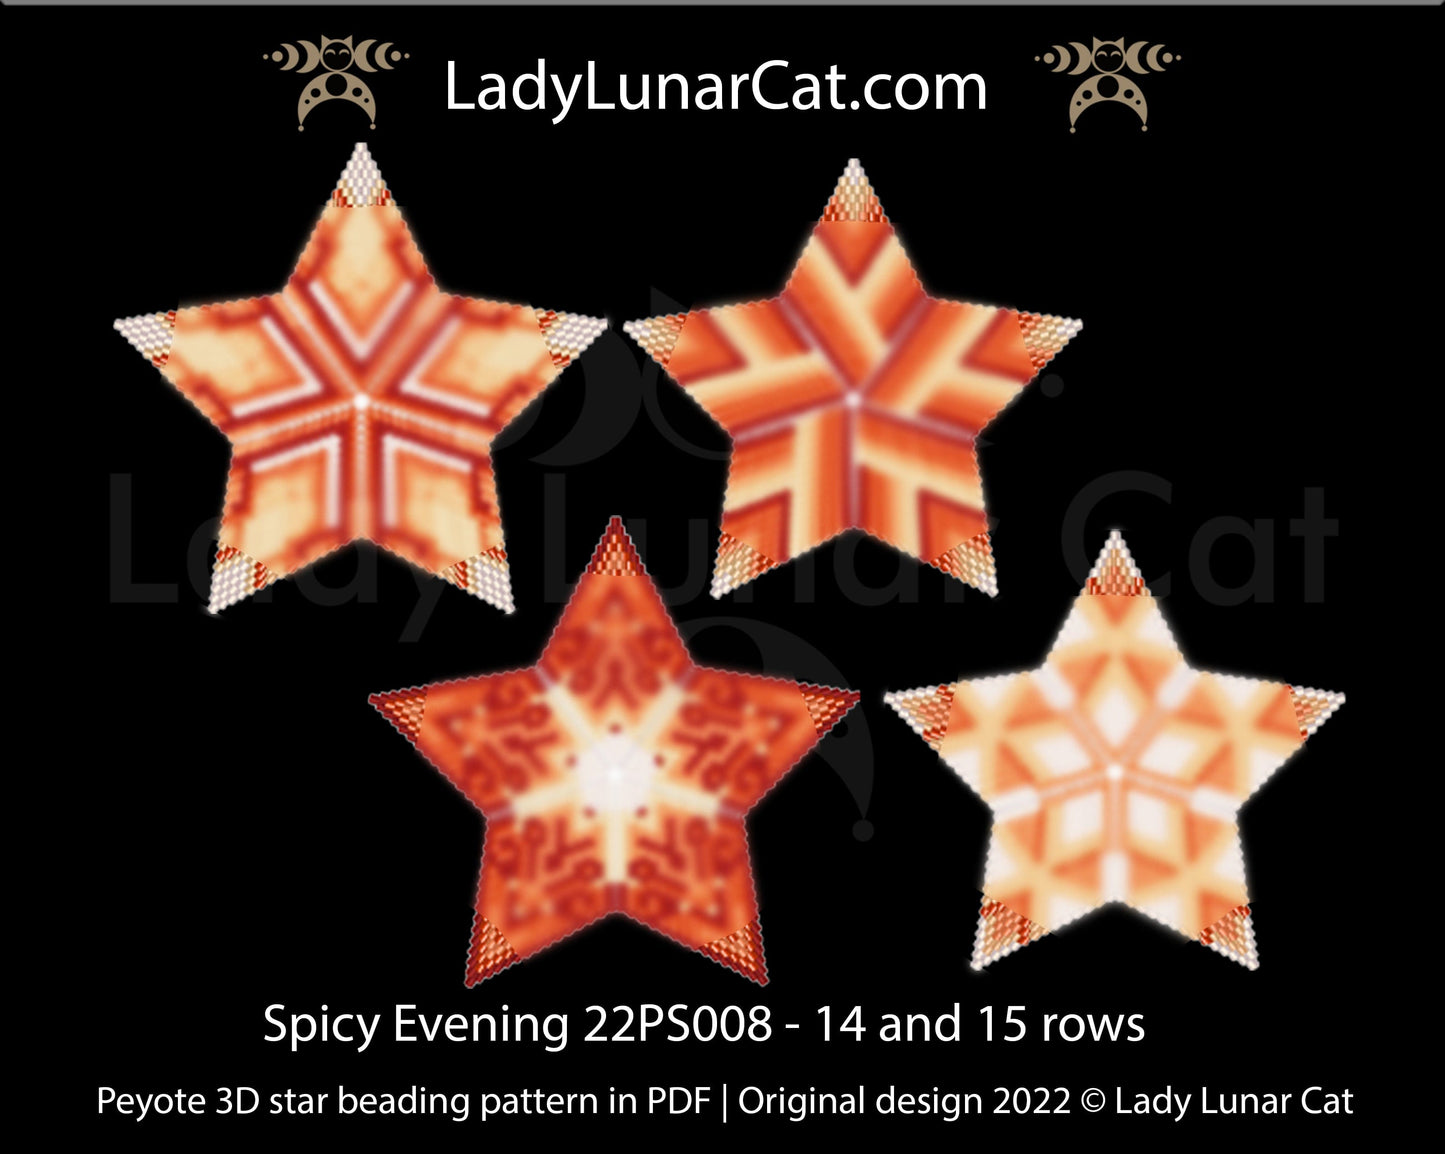 Peyote star pattern for beading, set - Spicy Evening 22PS008 14-15 rows LadyLunarCat